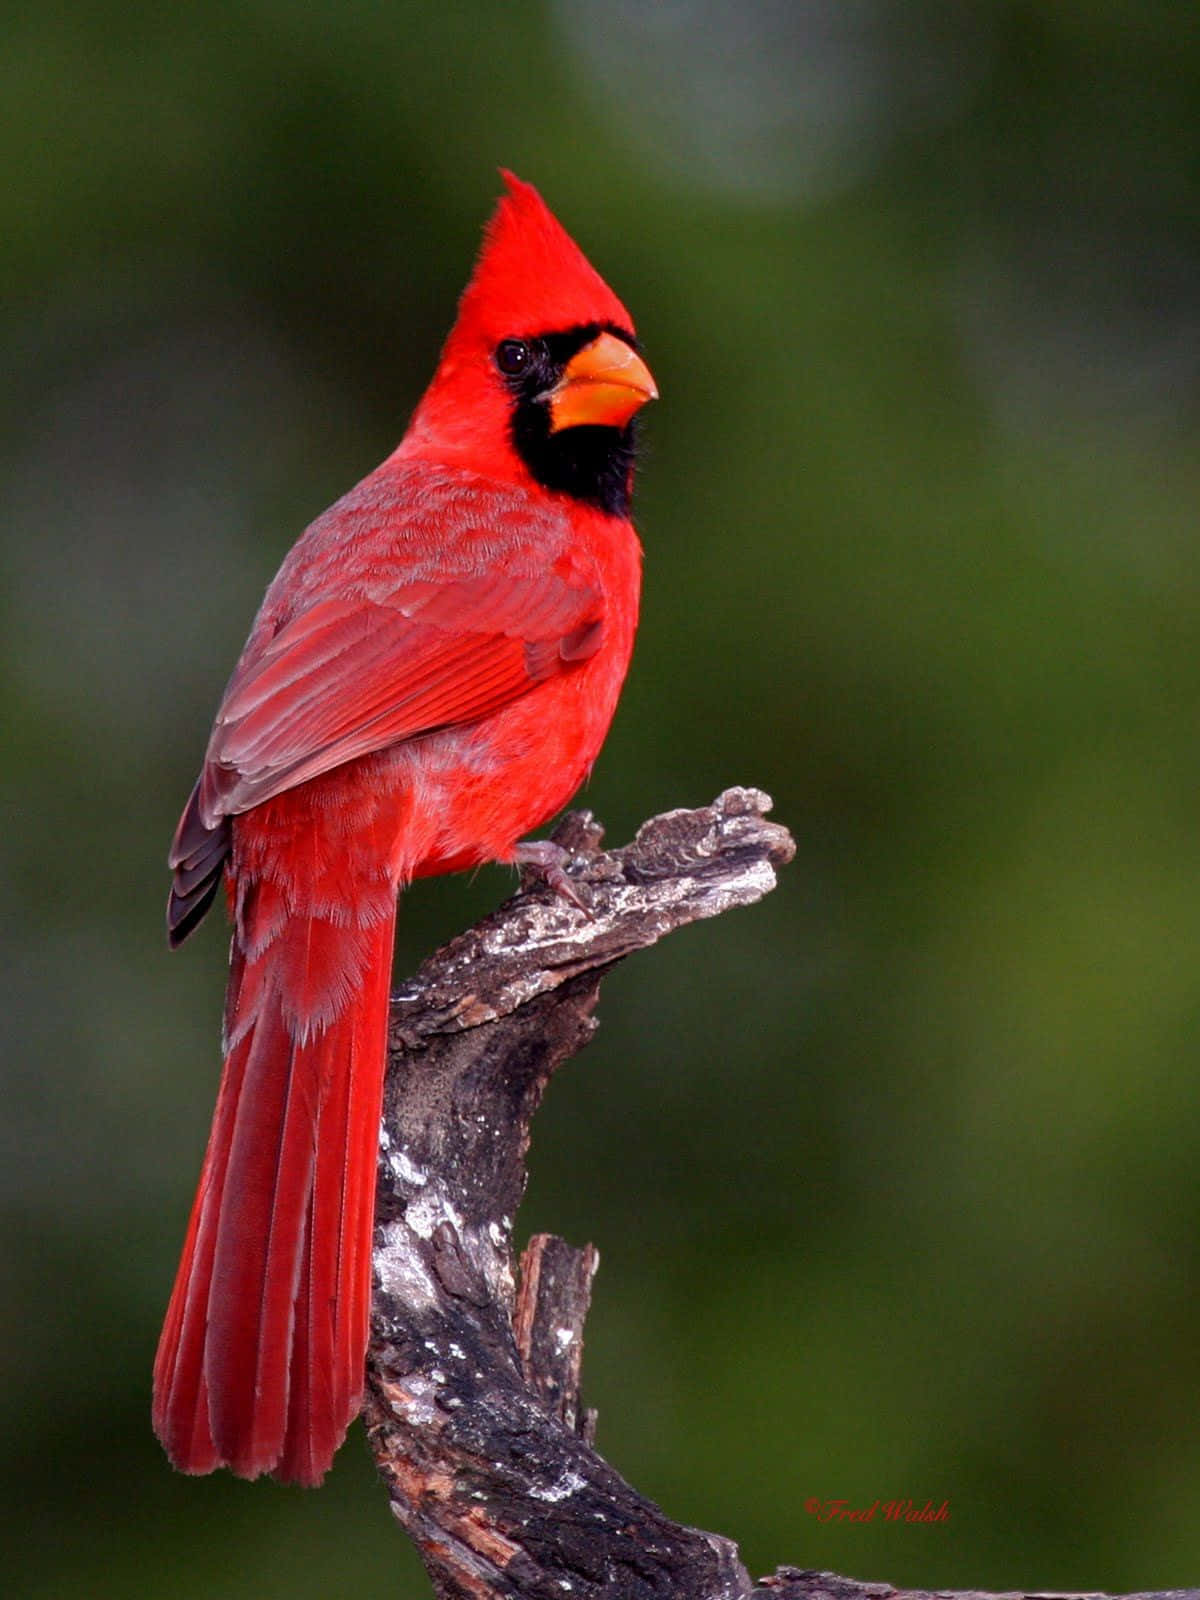 A gorgeous cardinal in vibrant color perched atop a flowering tree